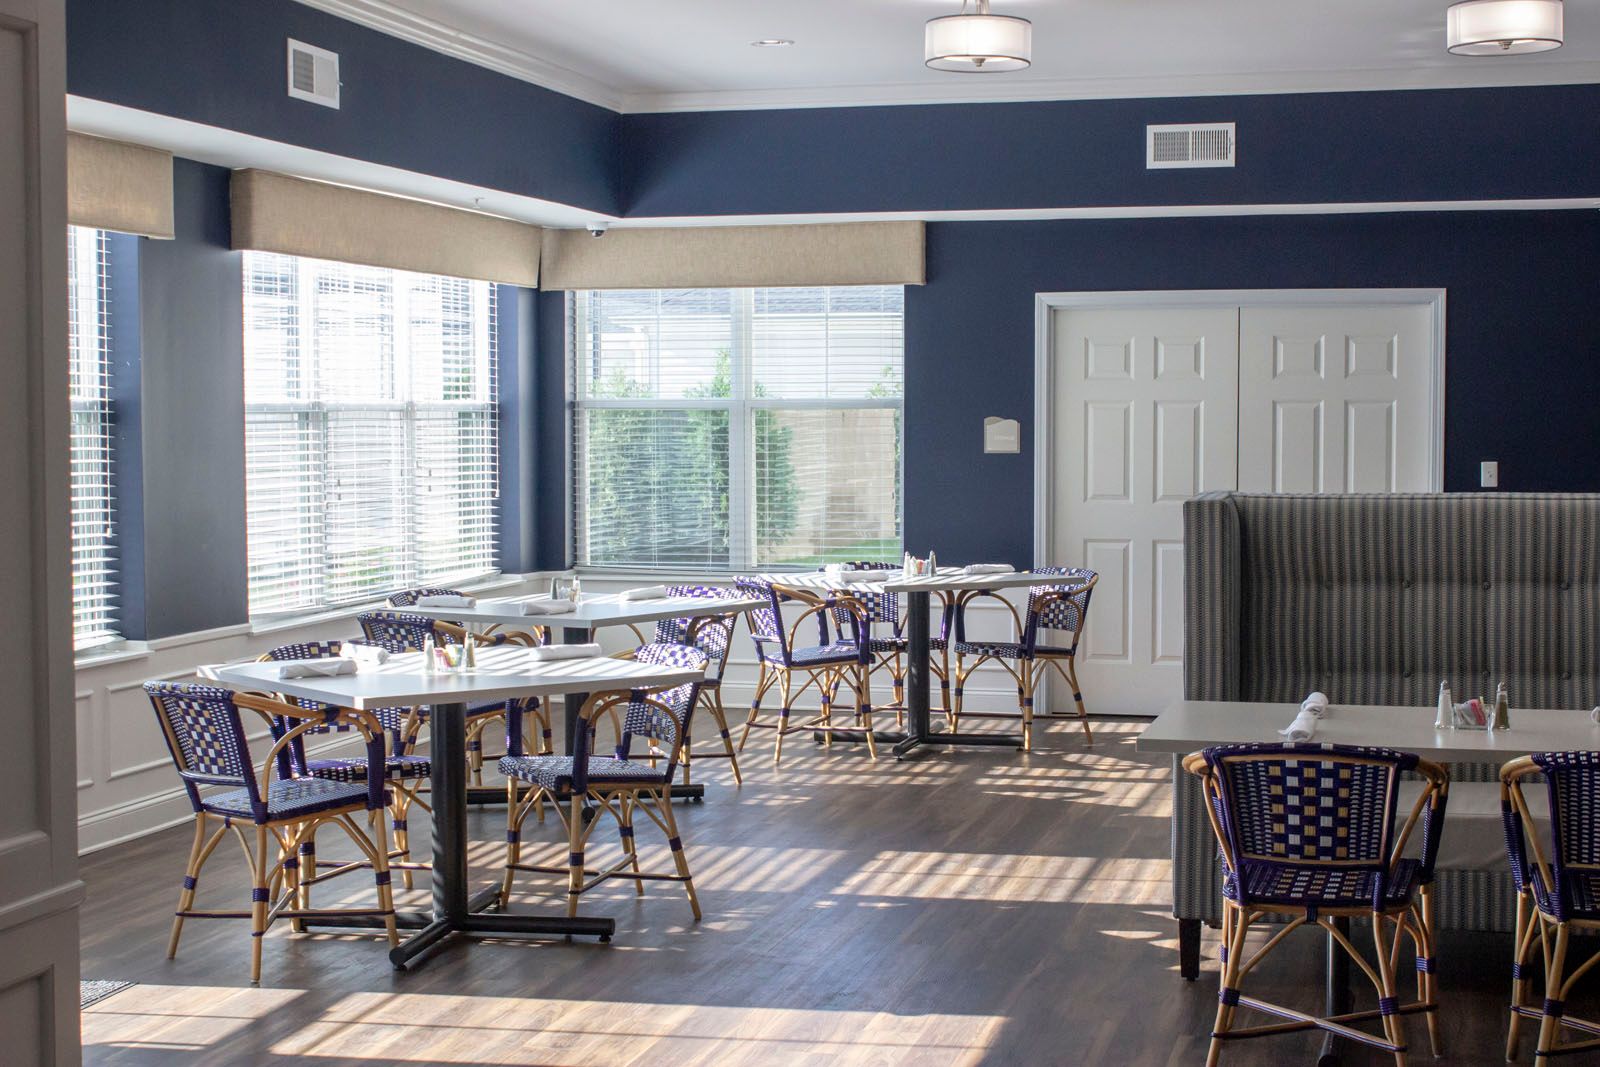 Interior view of Storypoint Collierville senior living community featuring a dining area with wooden furniture.